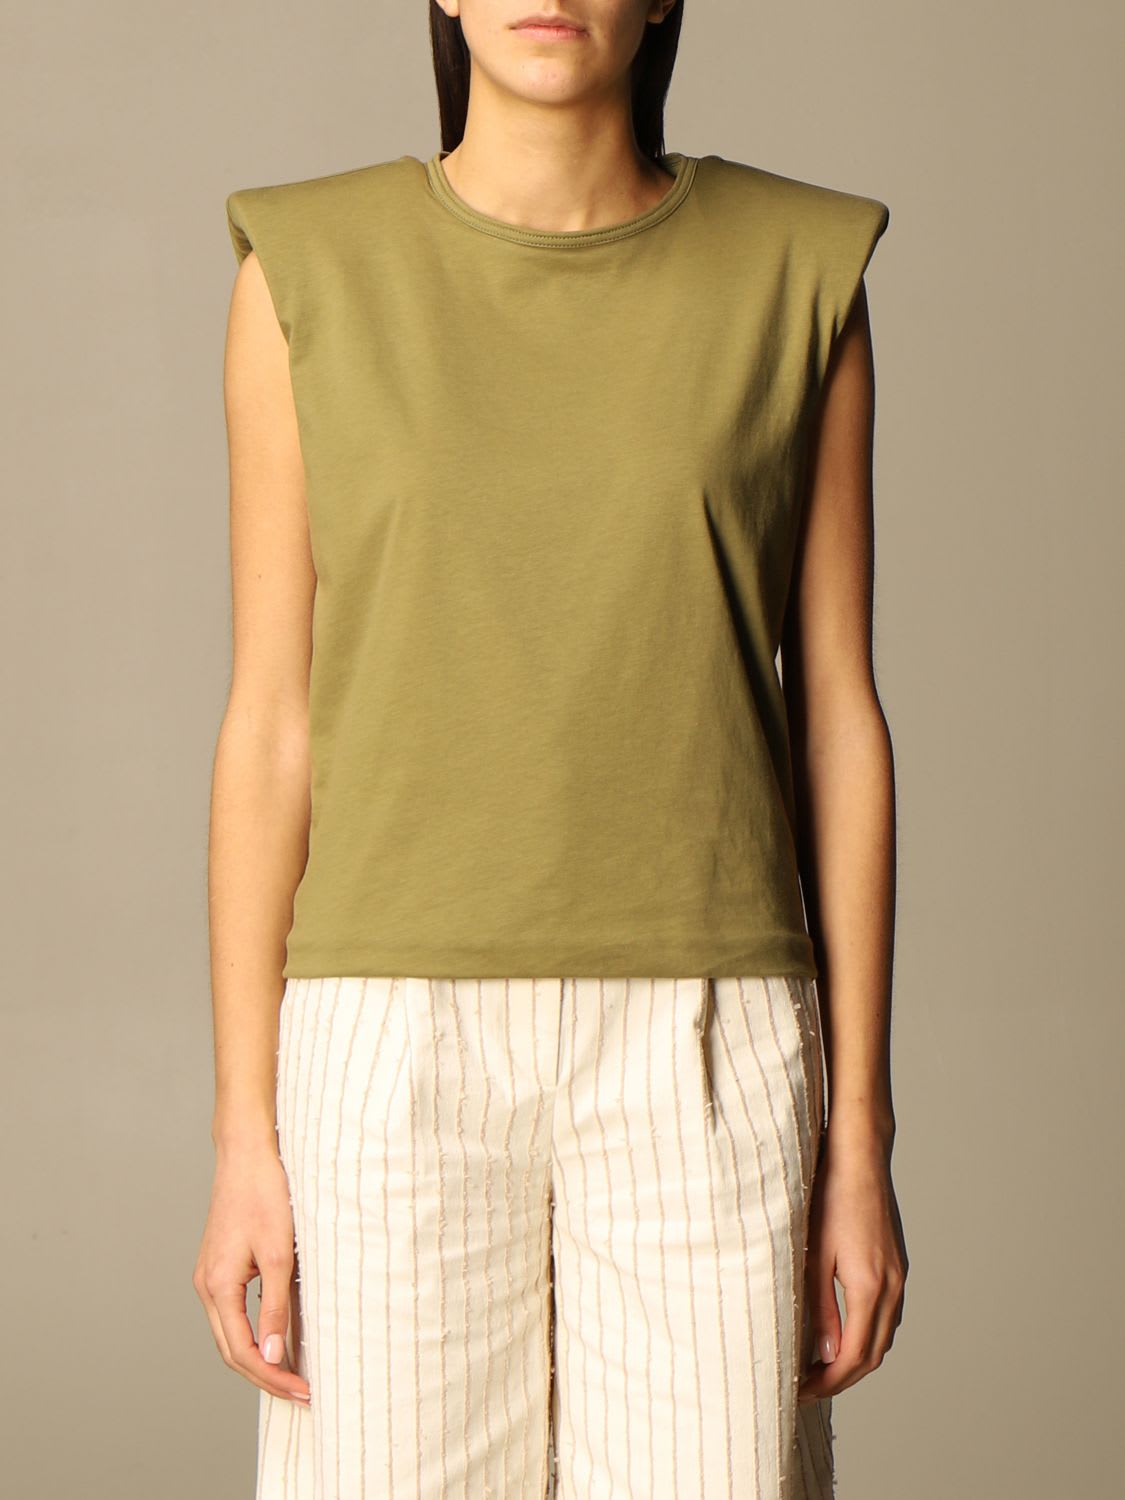 Federica Tosi Top Federica Tosi Basic T-shirt With Padded Shoulder Straps